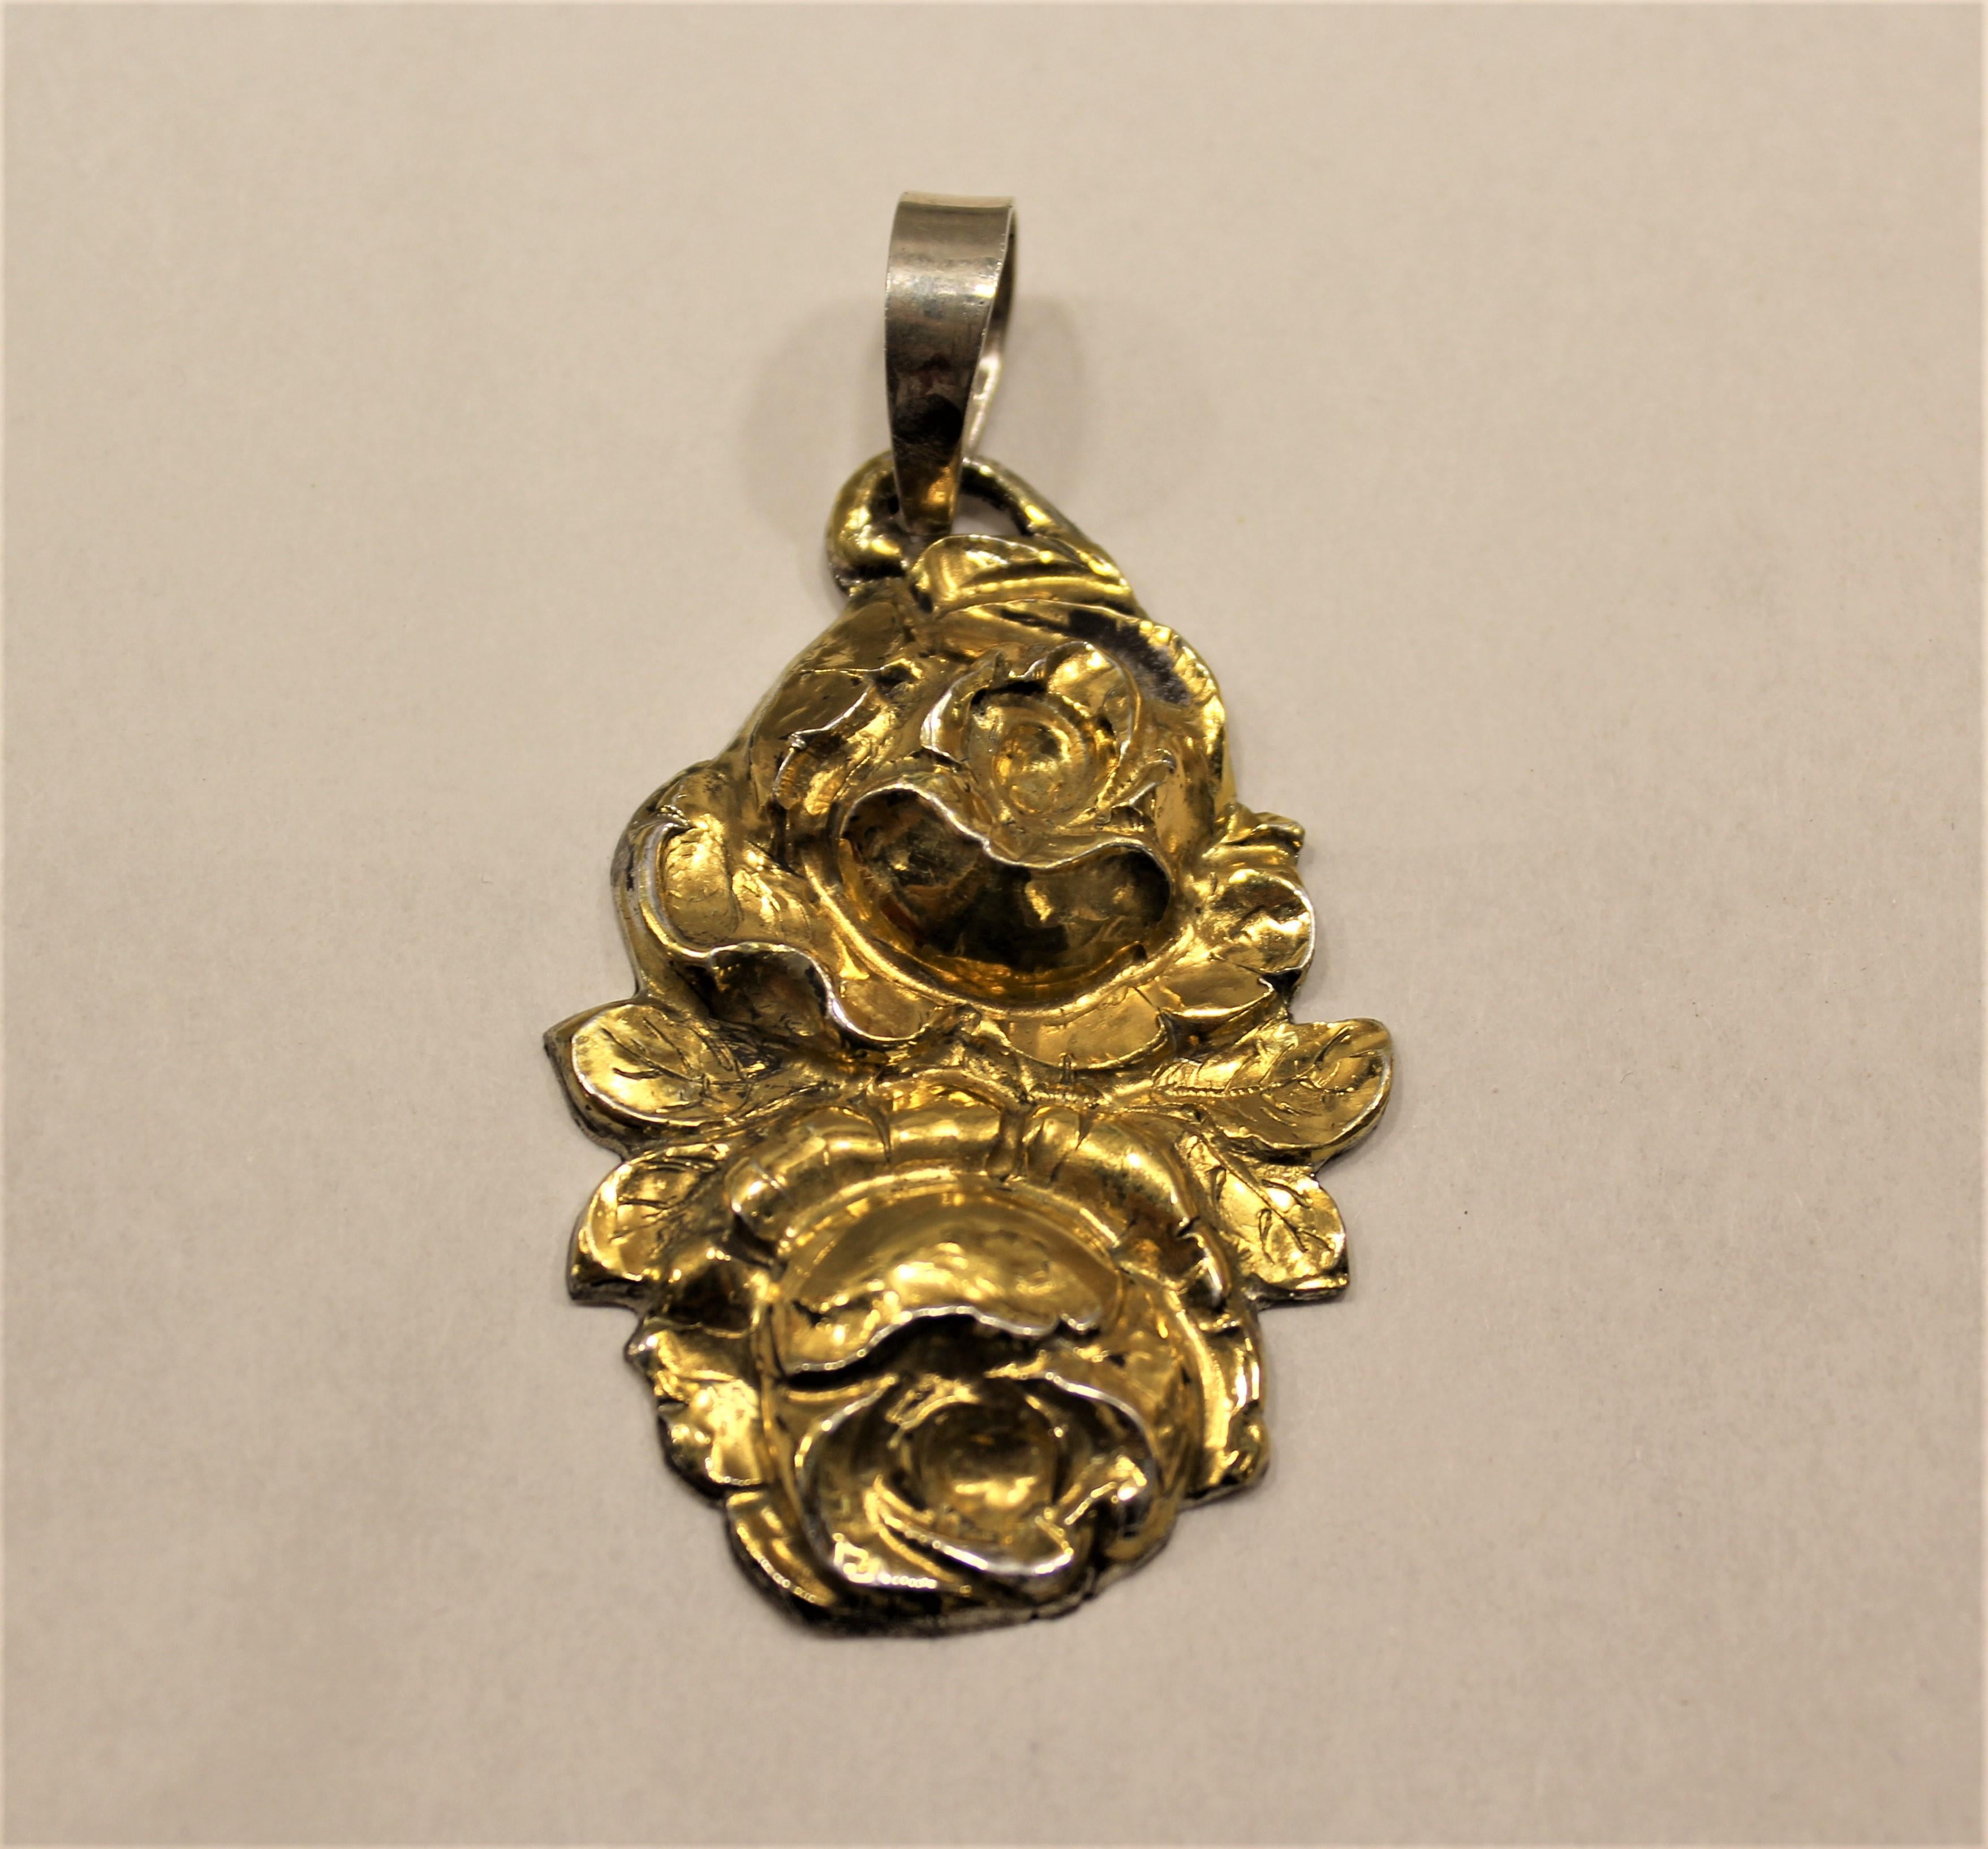 24 Karat Gold, Solid Silver, Pendant, Roses, Handcrafted, Italy In New Condition For Sale In Firenze, IT